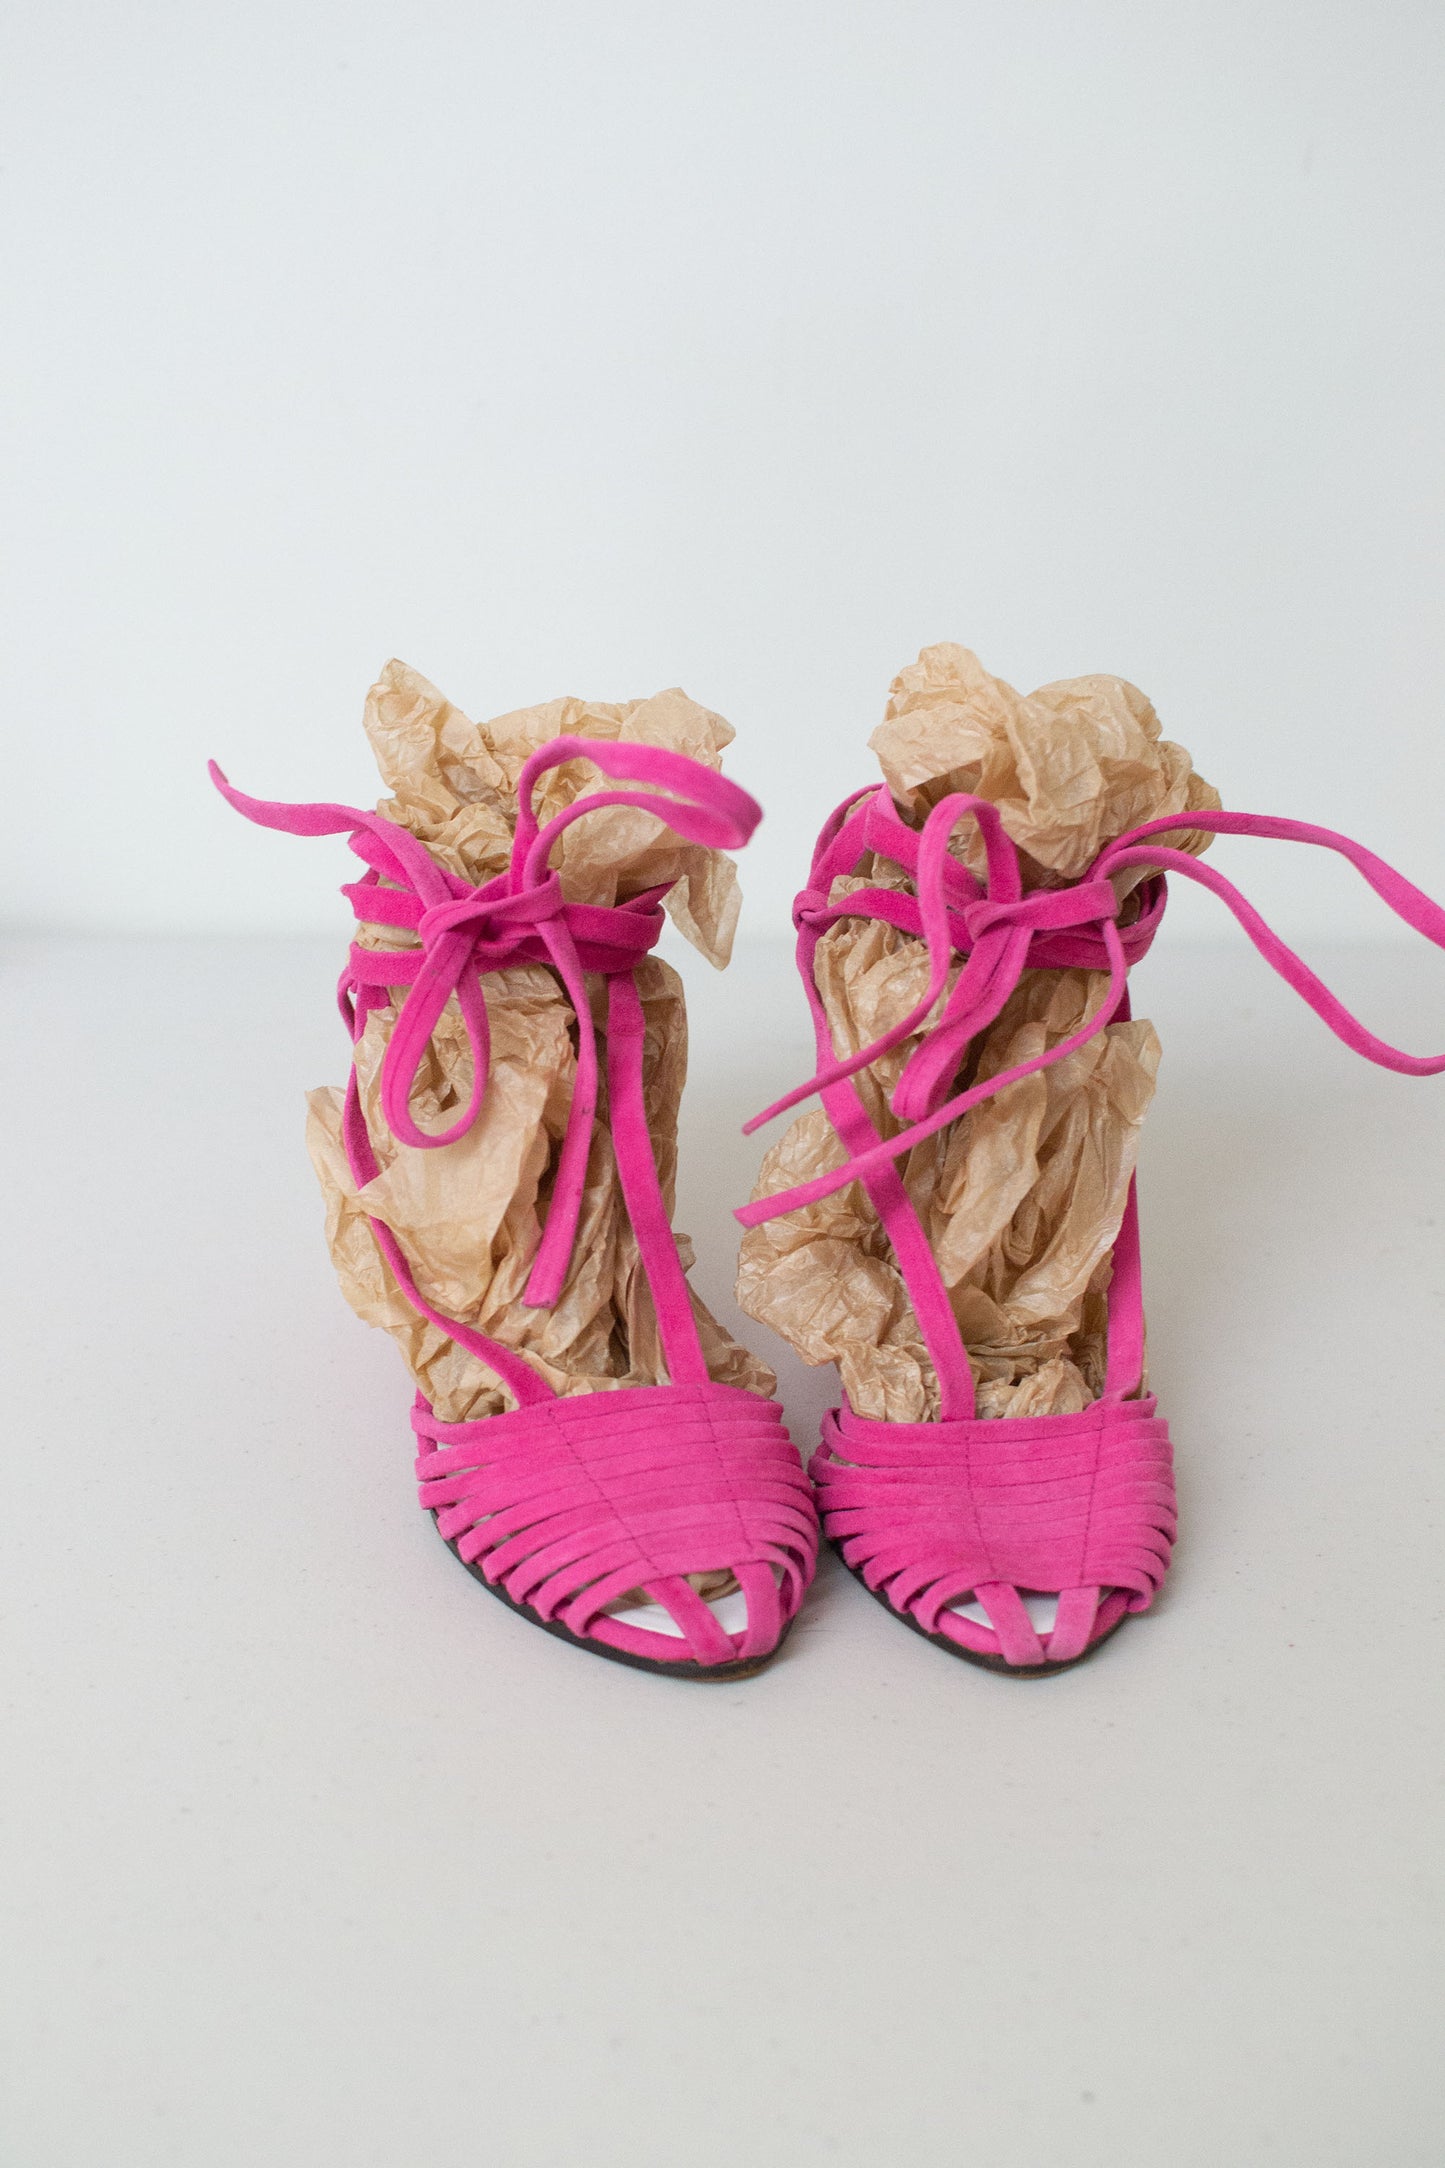 Shocking Pink Suede Lace Up Wedge Shoes | Robert Clergerie 7